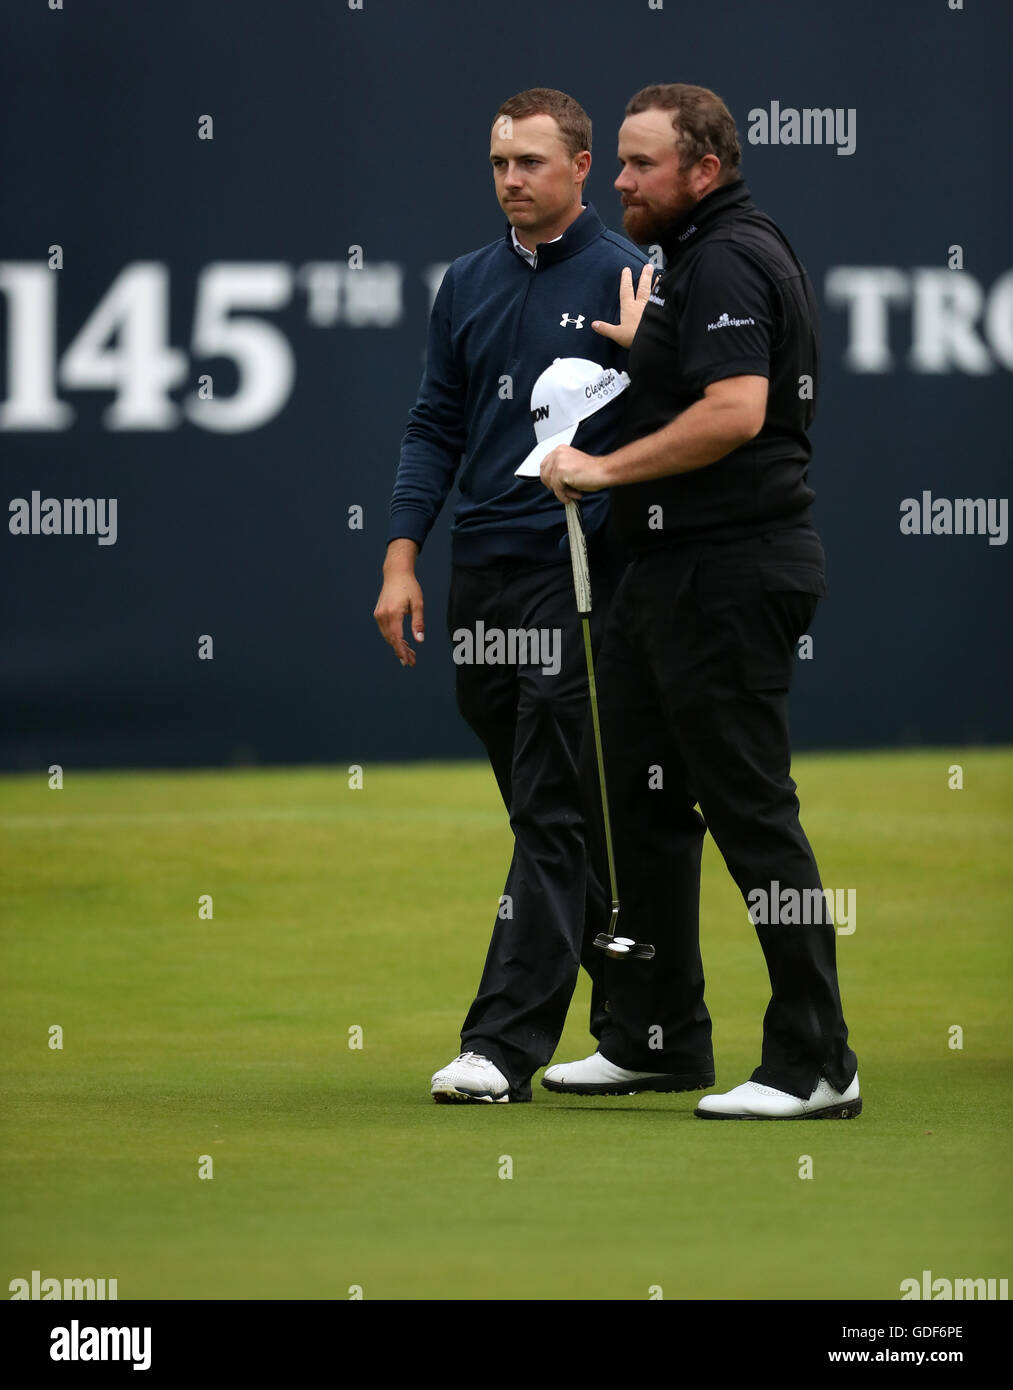 USA's Jordan Spieth (left) and Ireland's Shane Lowry after their round during day two of The Open Championship 2016 at Royal Troon Golf Club, South Ayrshire. Stock Photo